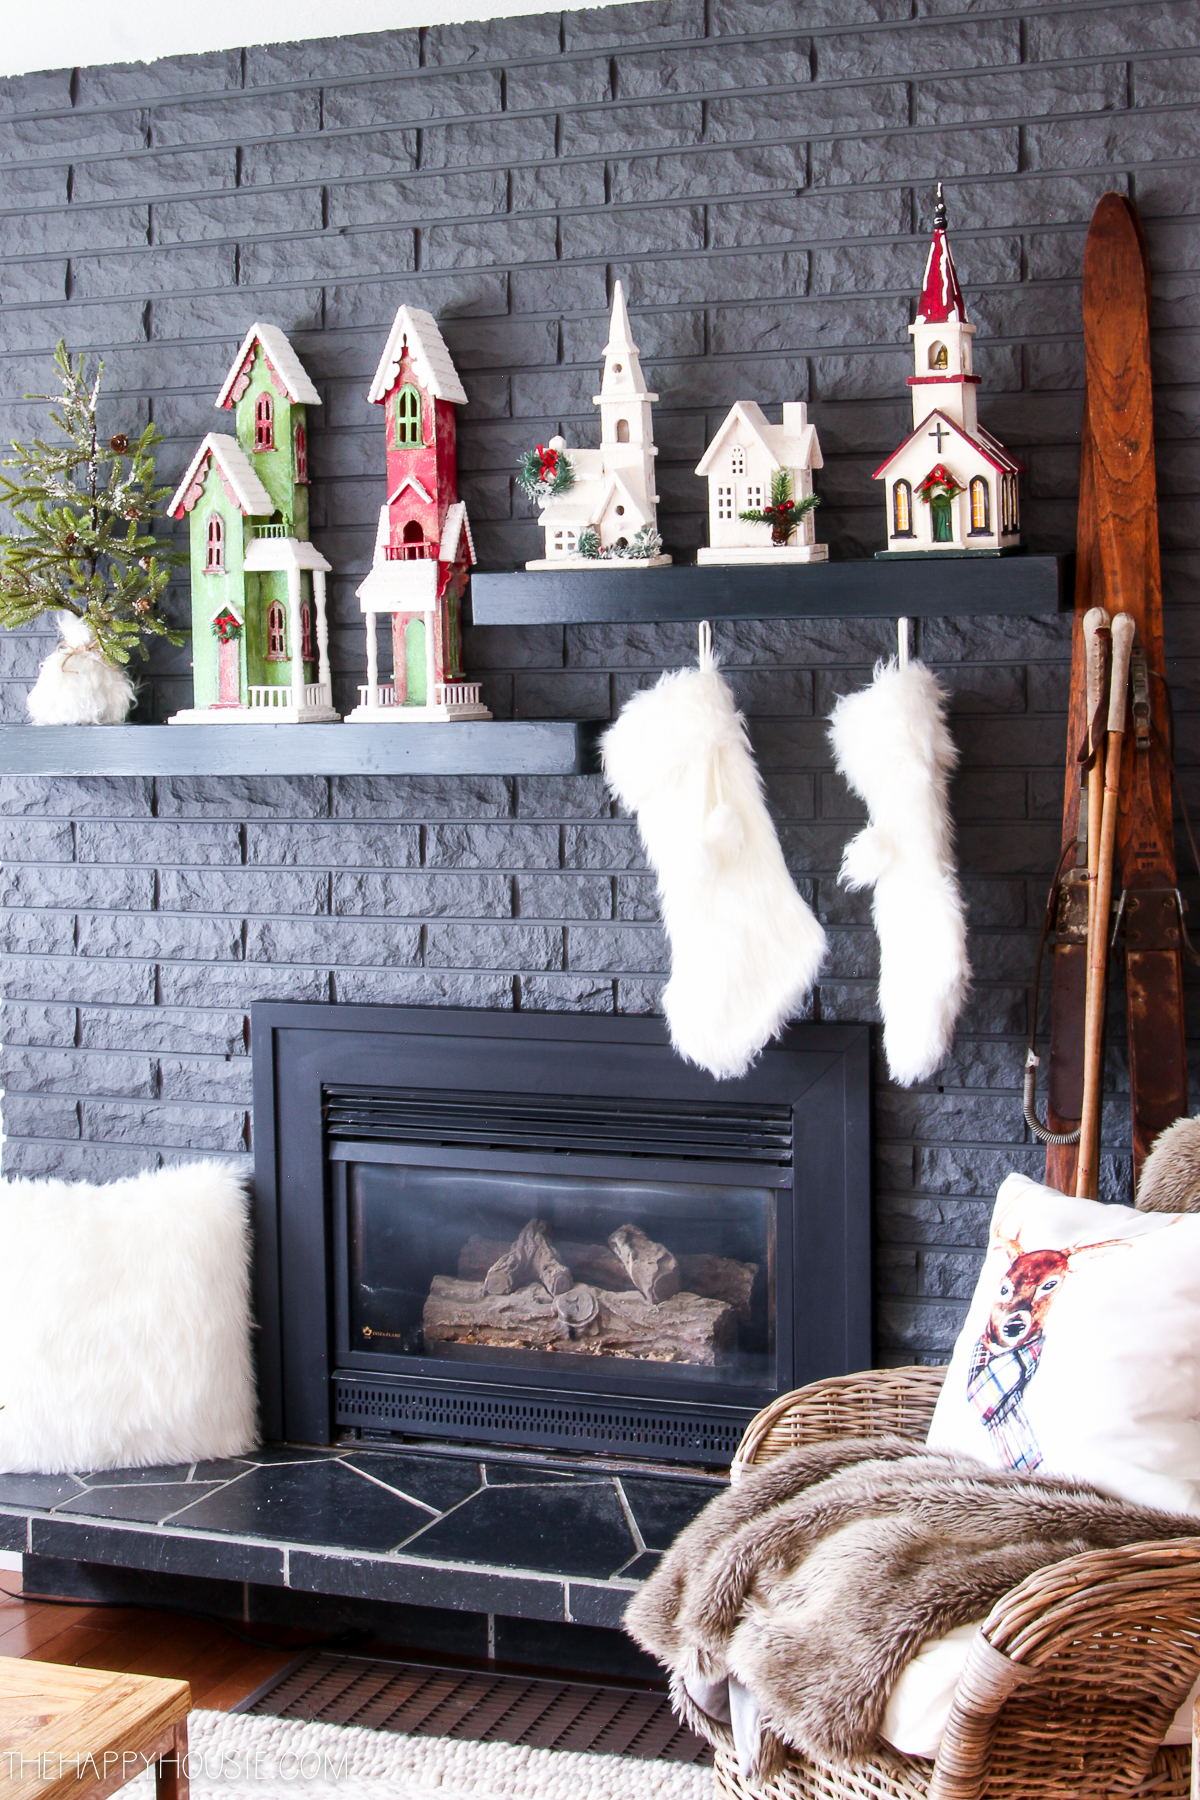 Little village houses on shelves above the fireplace.